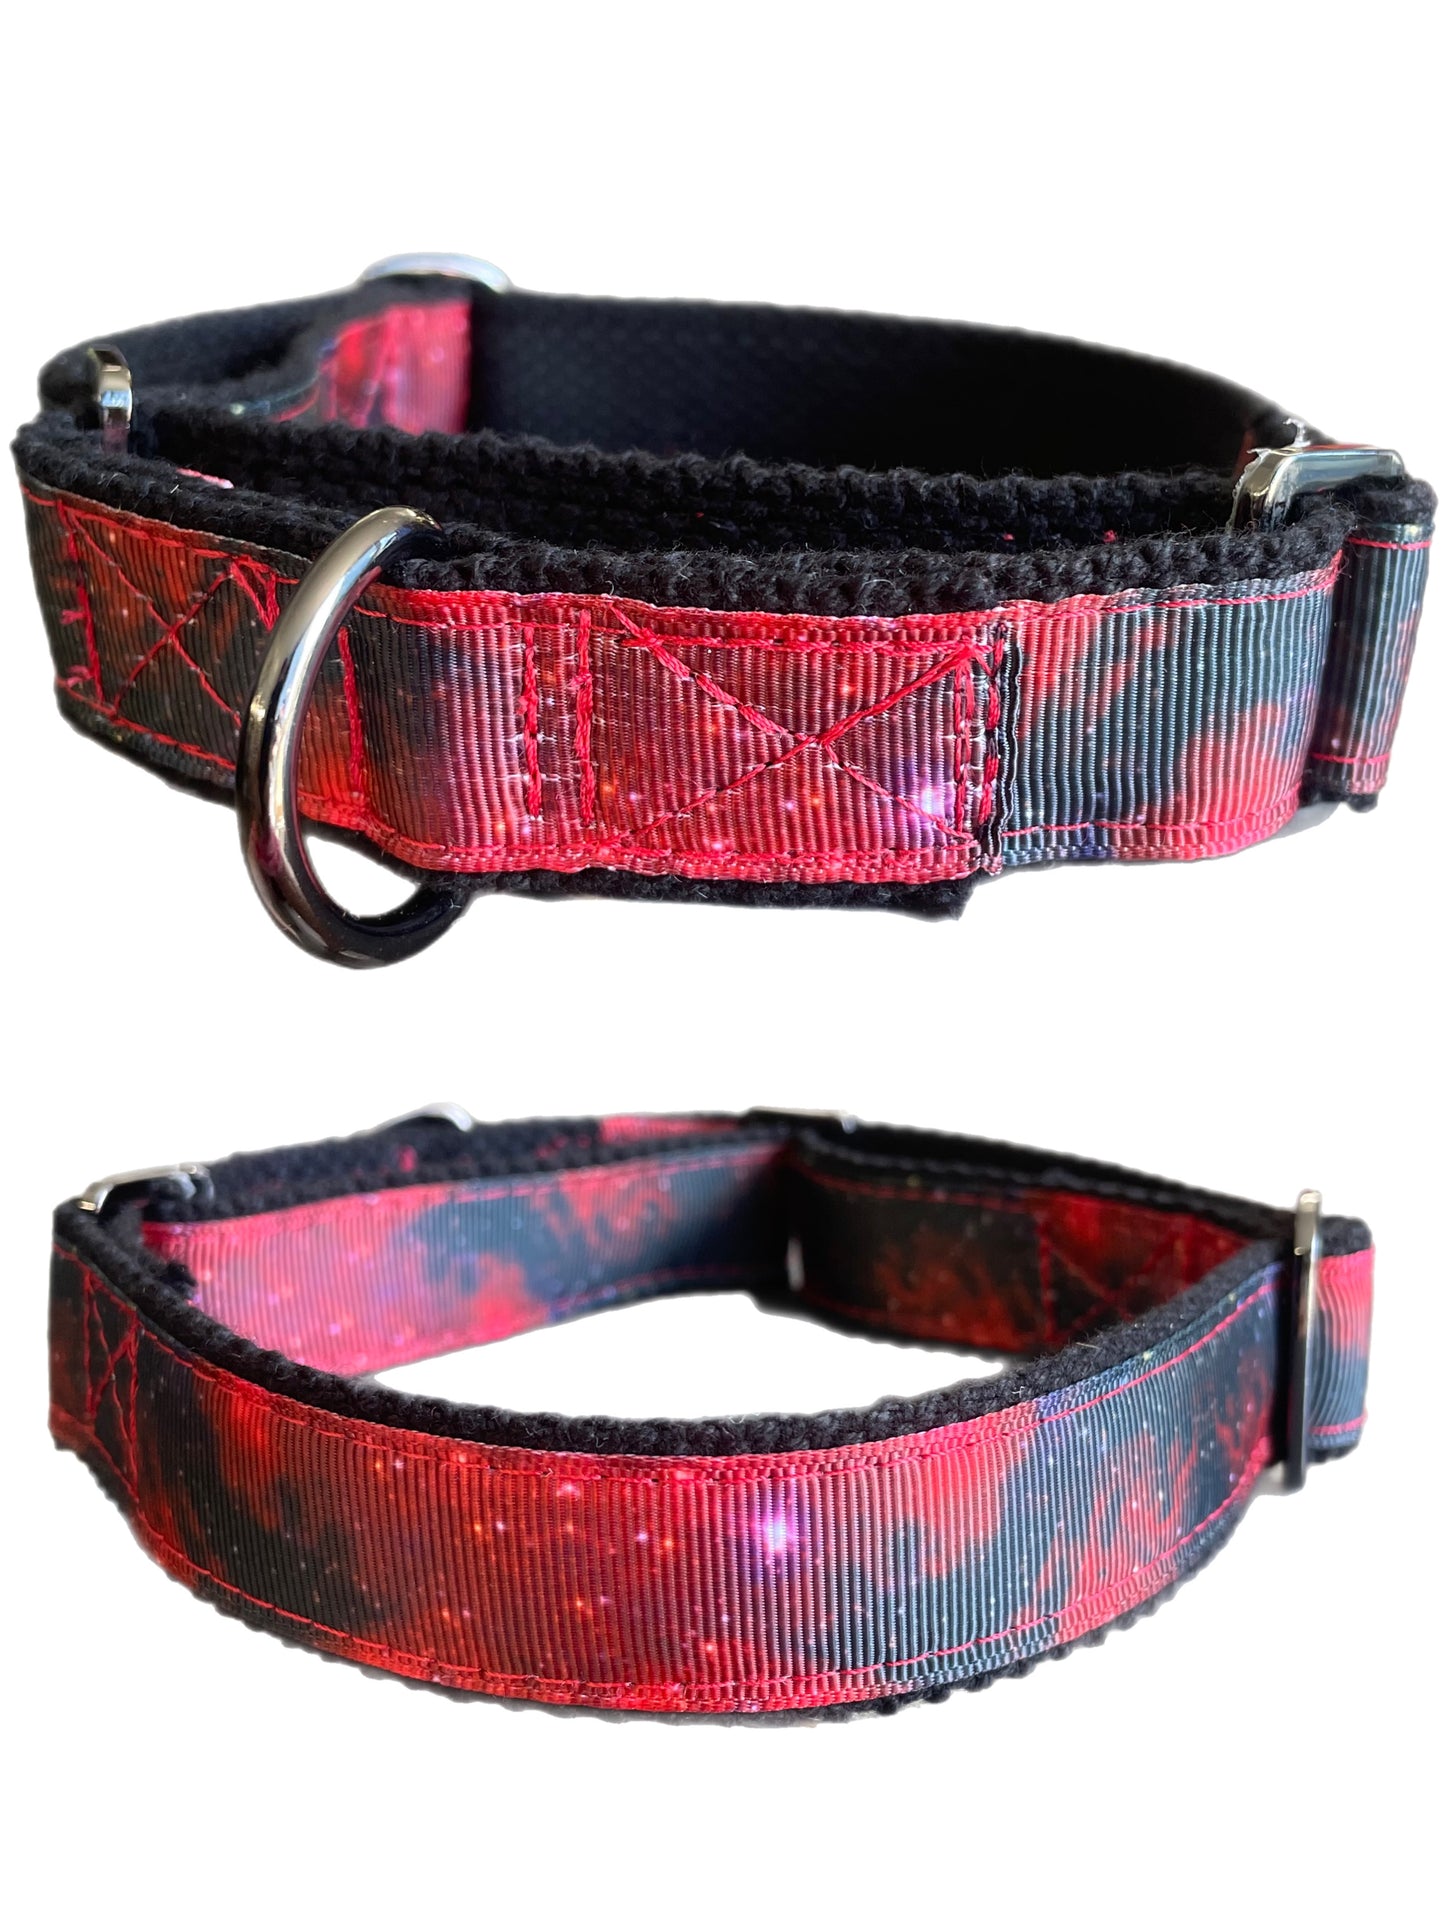 Greyhound Martingale 25mm house collar with galaxy design on red